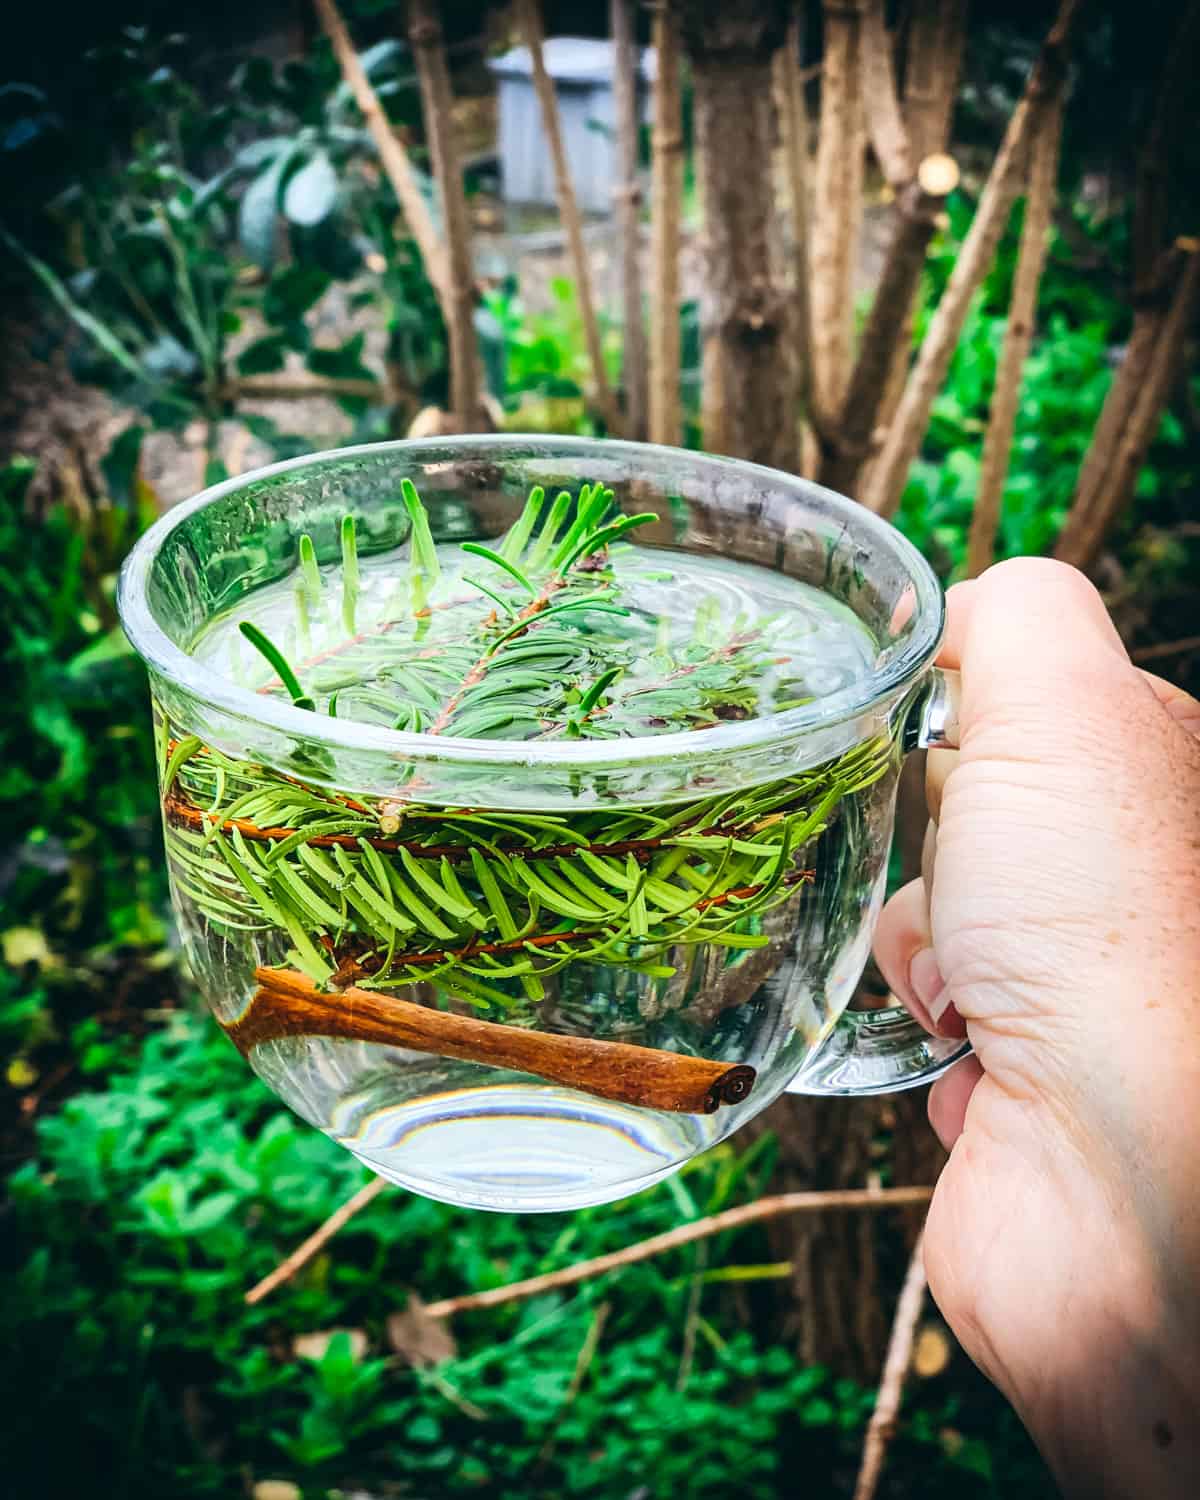 Clear glass tea mug filled with water and fir needle sprigs, with a cinnamon stick at the bottom. Natural background with greens and brown tree branches. 